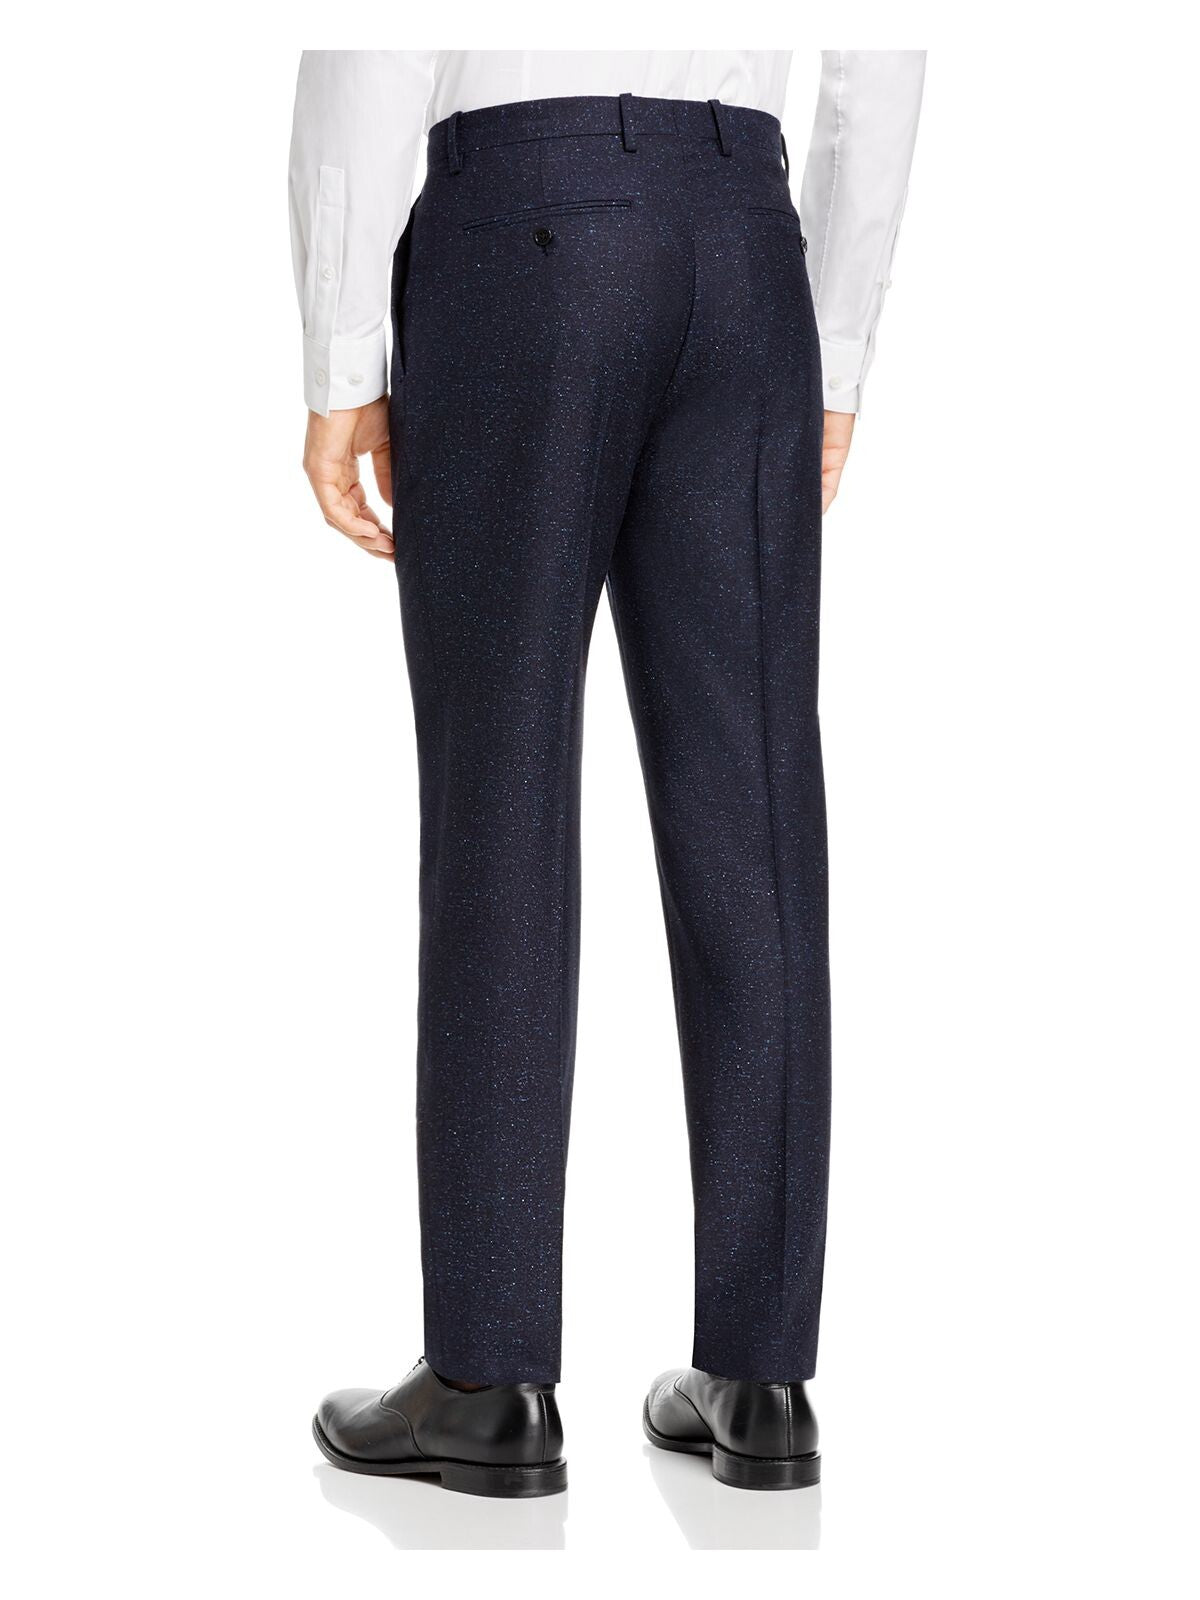 THEORY Mens Mayer Bowen Navy Flat Front, Tapered, Speckle Classic Fit Pants 33